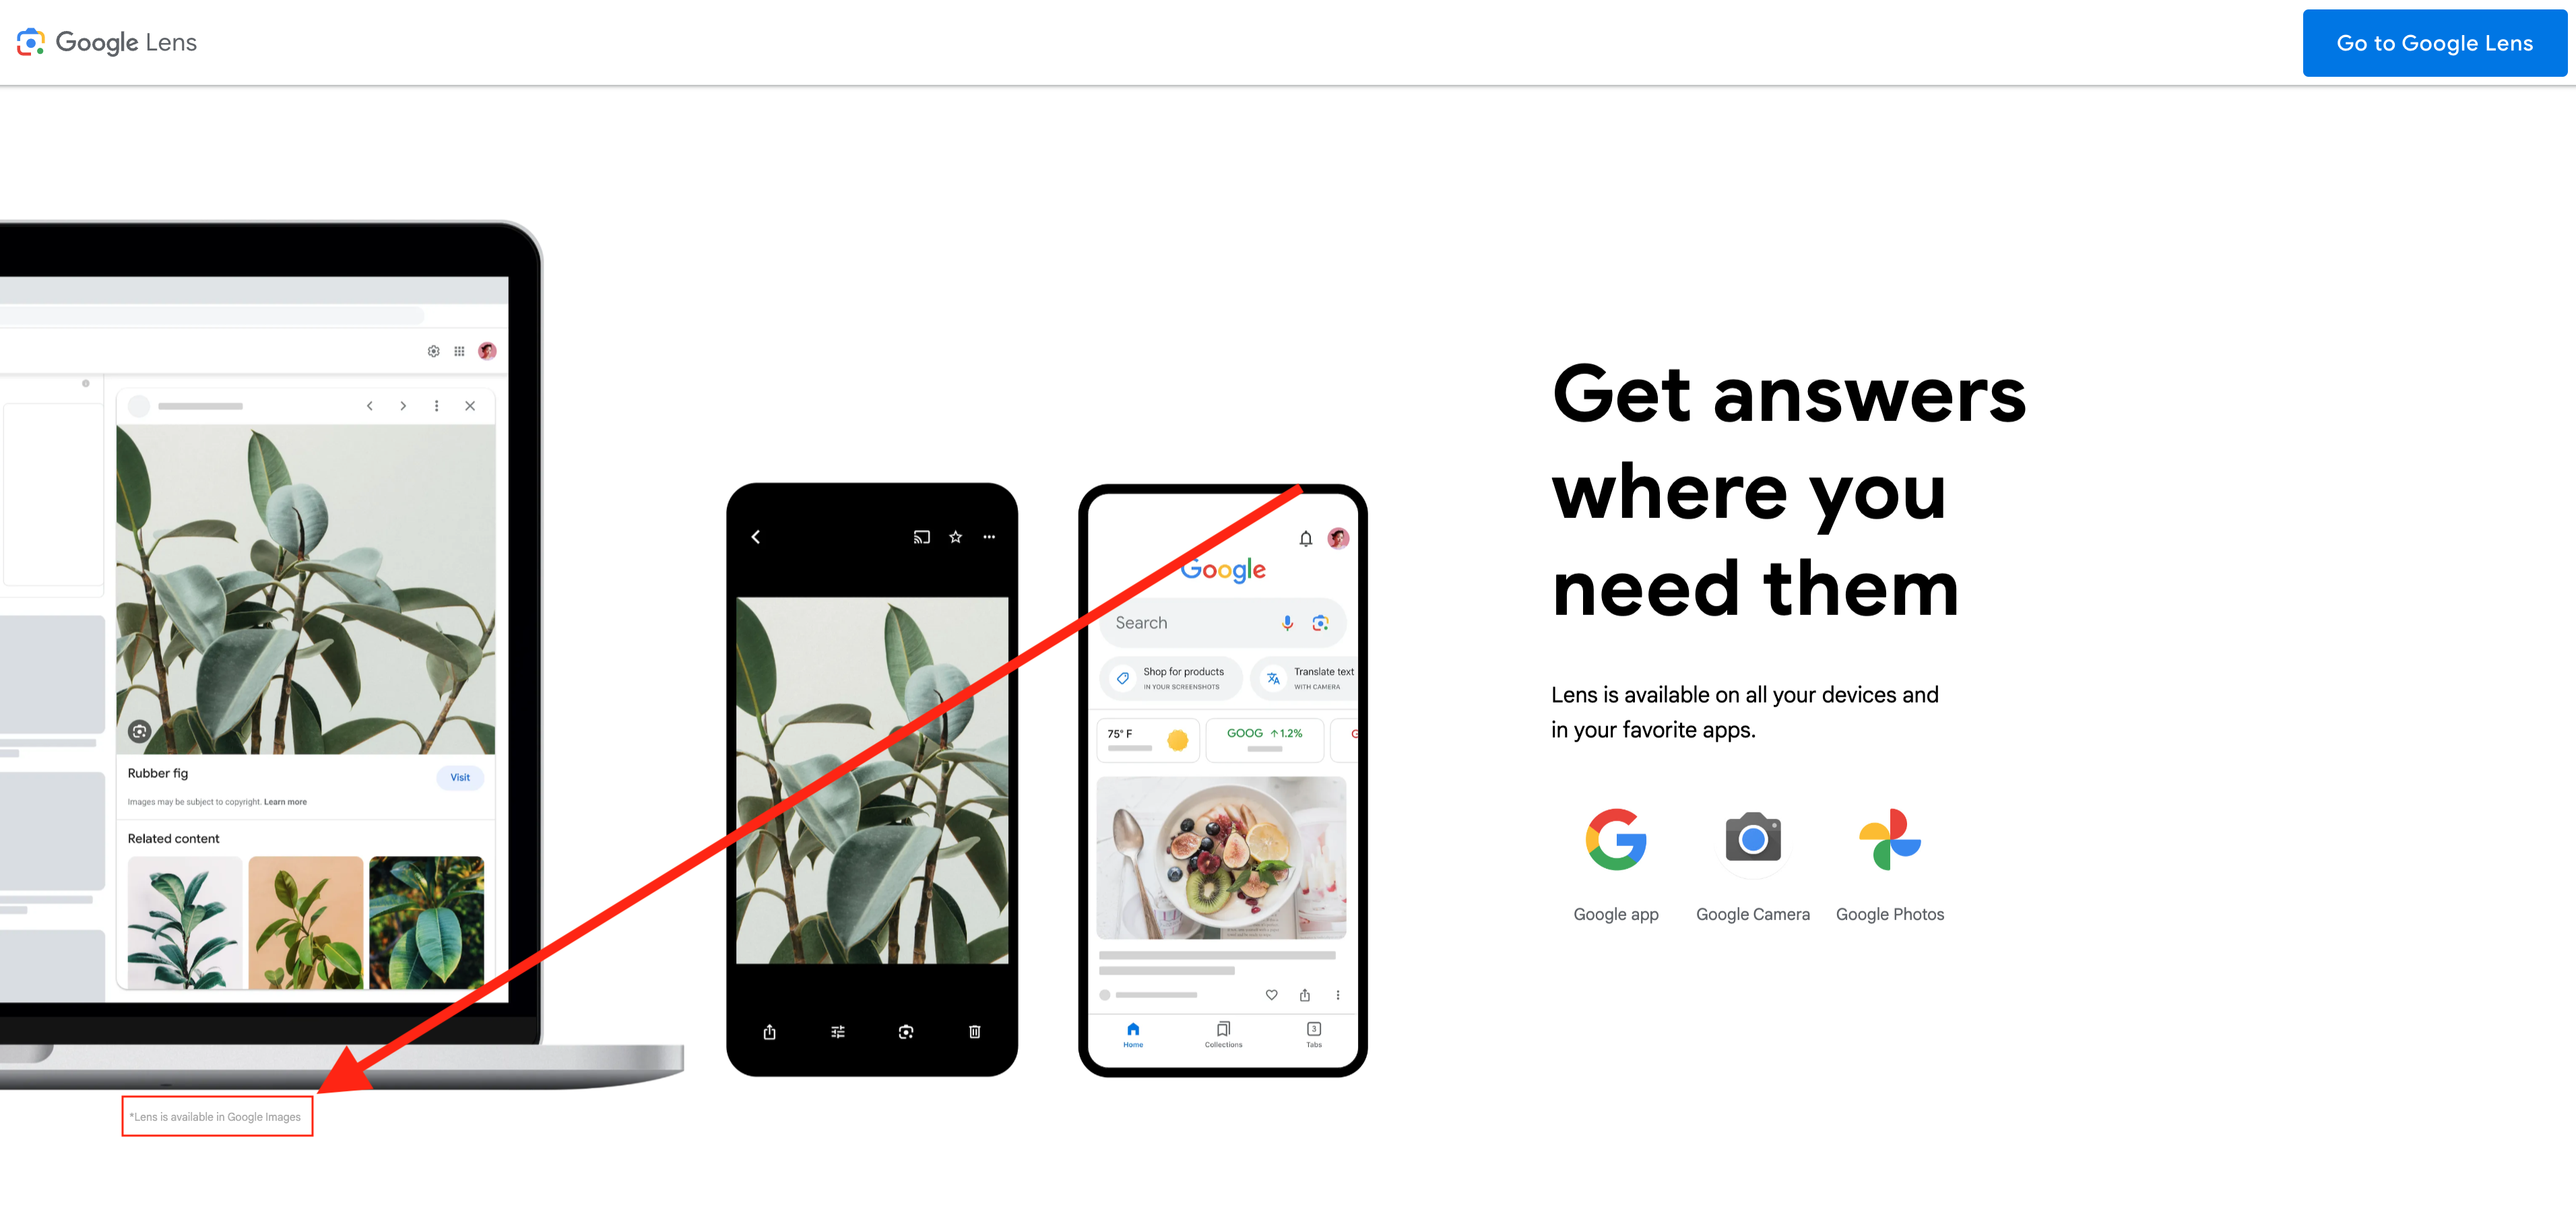 Screenshot from the Google Lens page. In small font below a depiction of an image search on a laptop: '*Lens is available in Google Images'